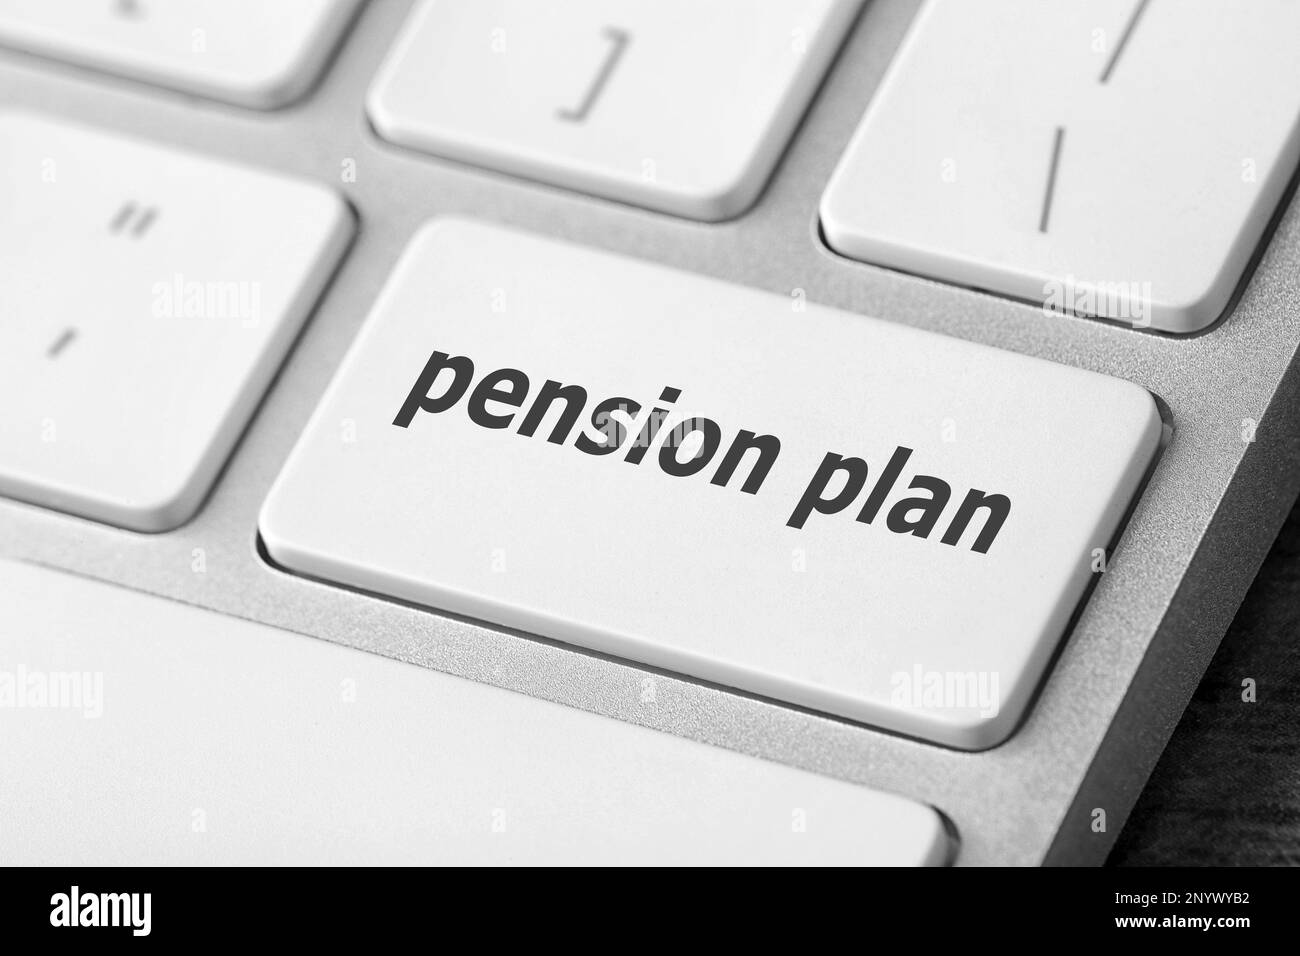 Modern computer keyboard with text Pension Plan on button, closeup view Stock Photo